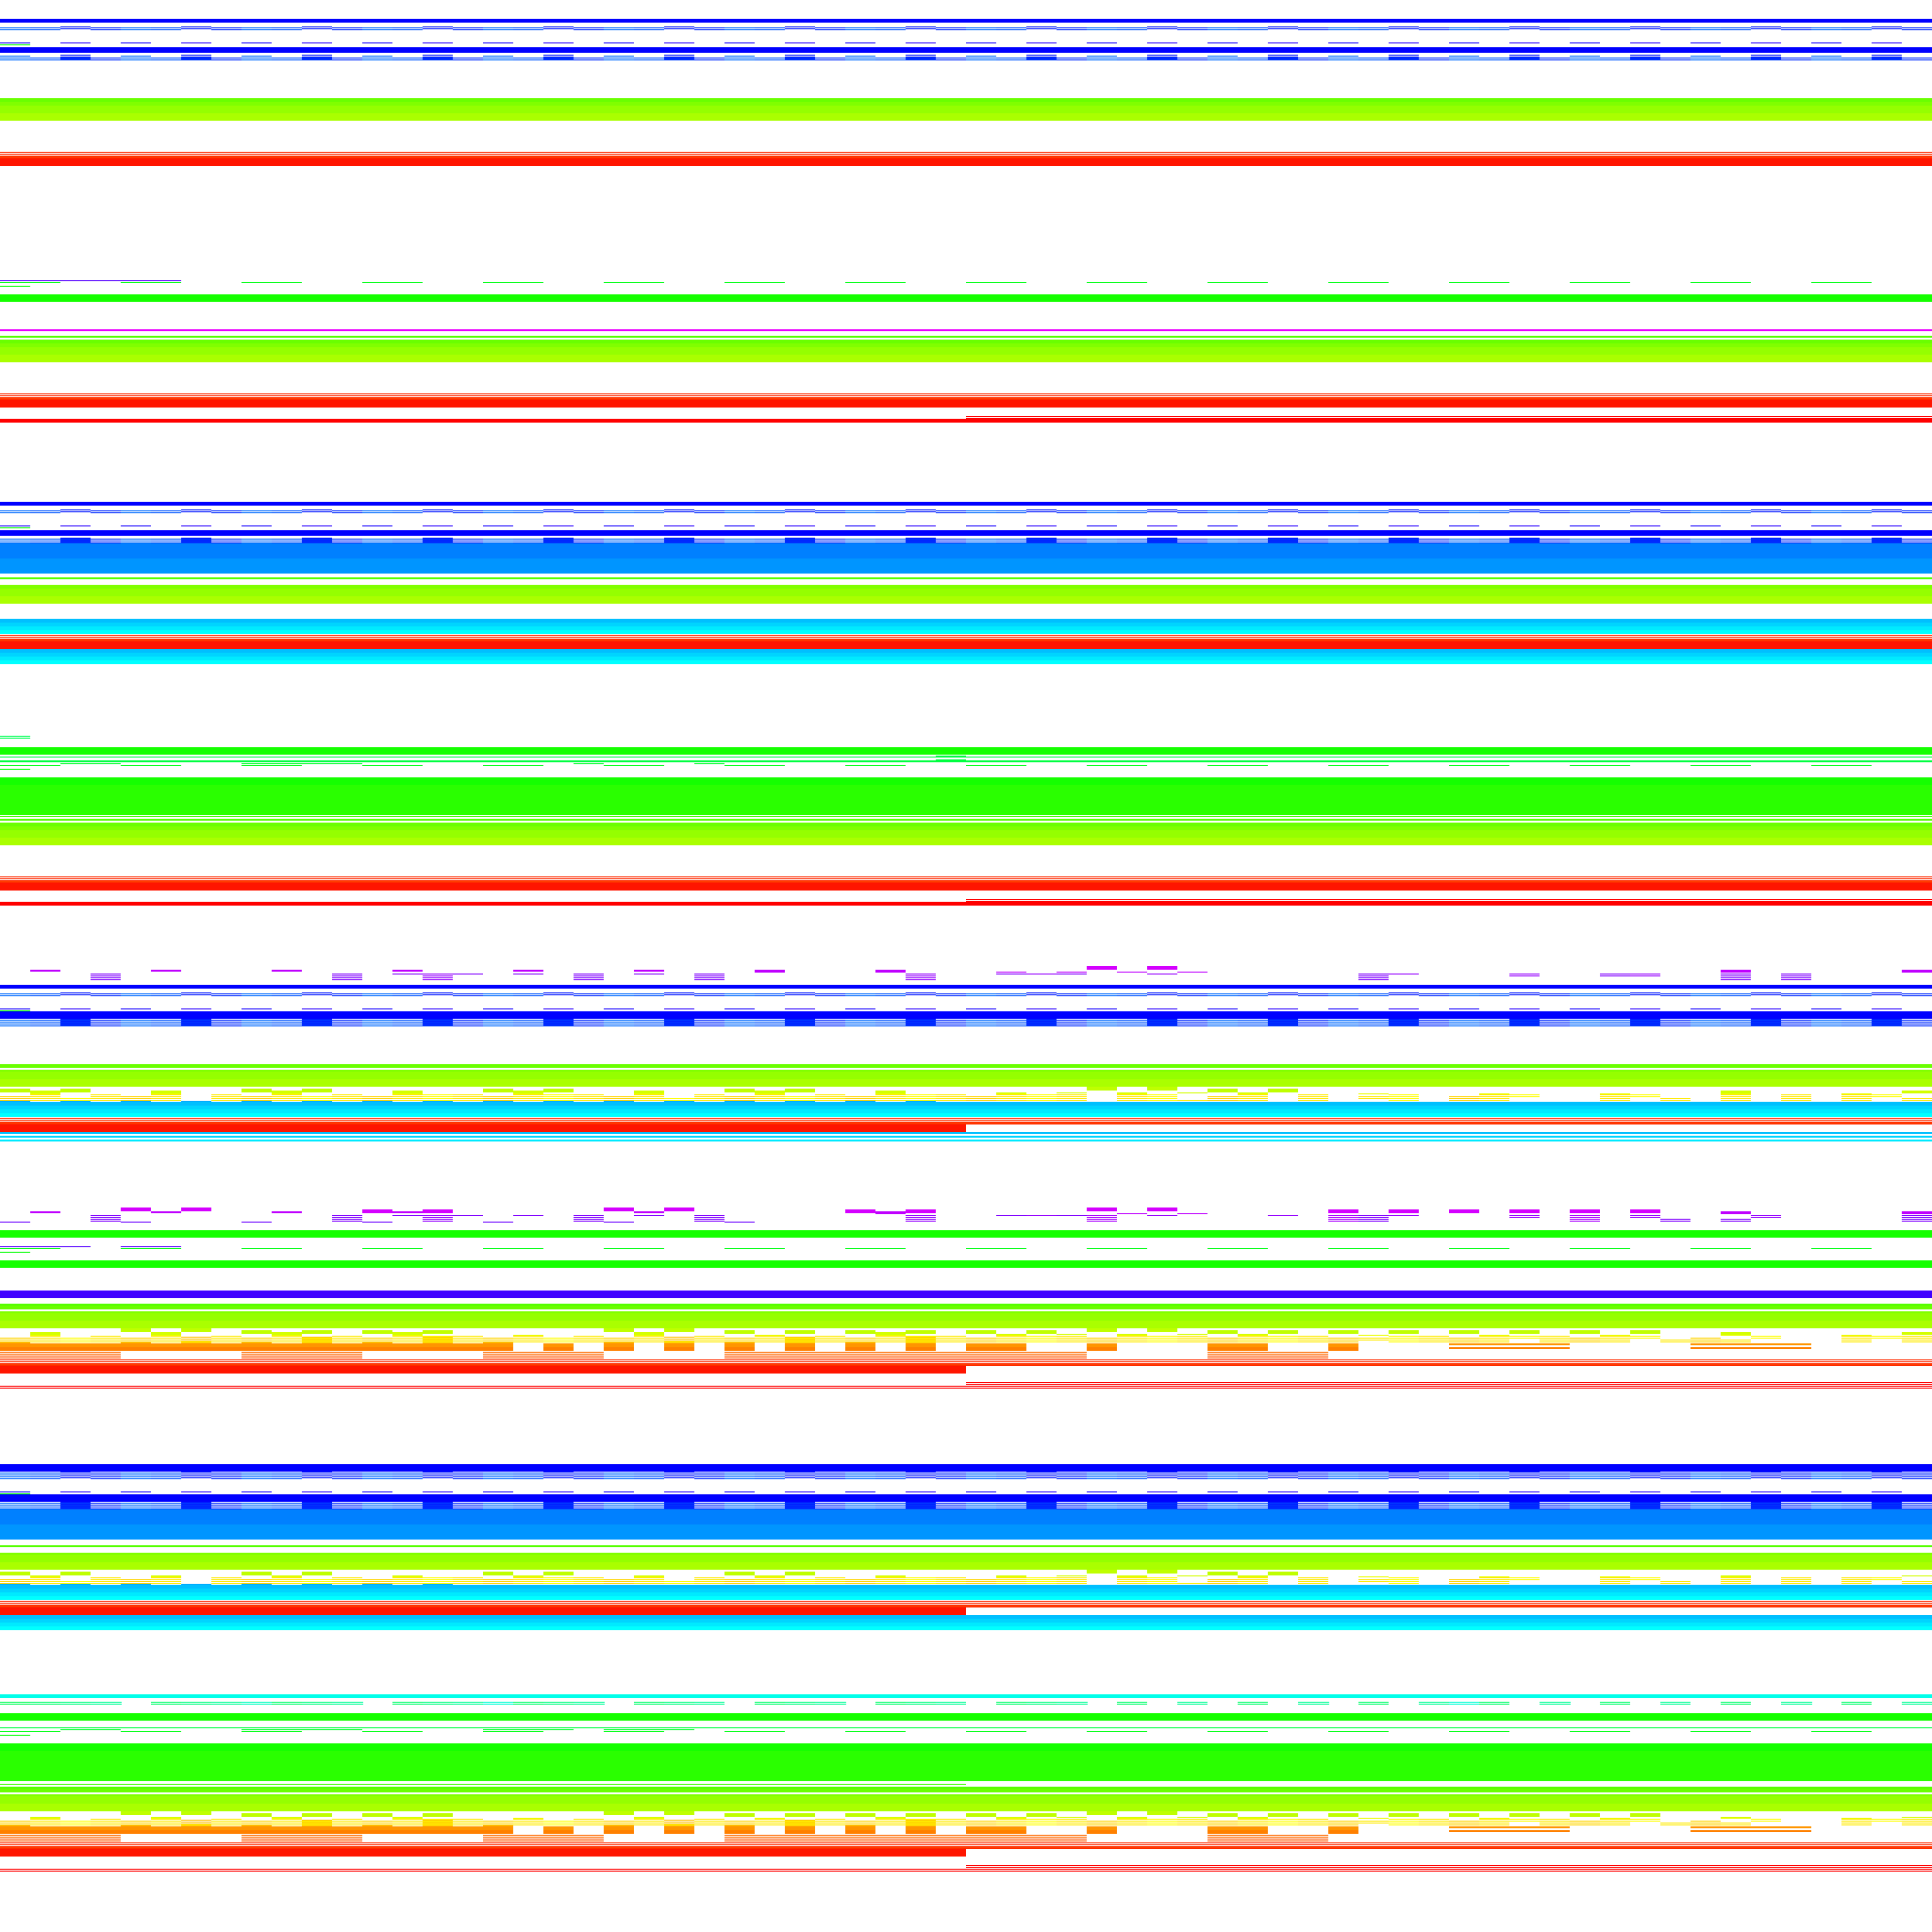 An image showing the 32-bit
  encoding space. Mostly there are horizontal thick lines of different
  colors. This shows that the higher 16 bits tend to keep similar
  instructions together, although there is some mirroring around the
  middle of the image.